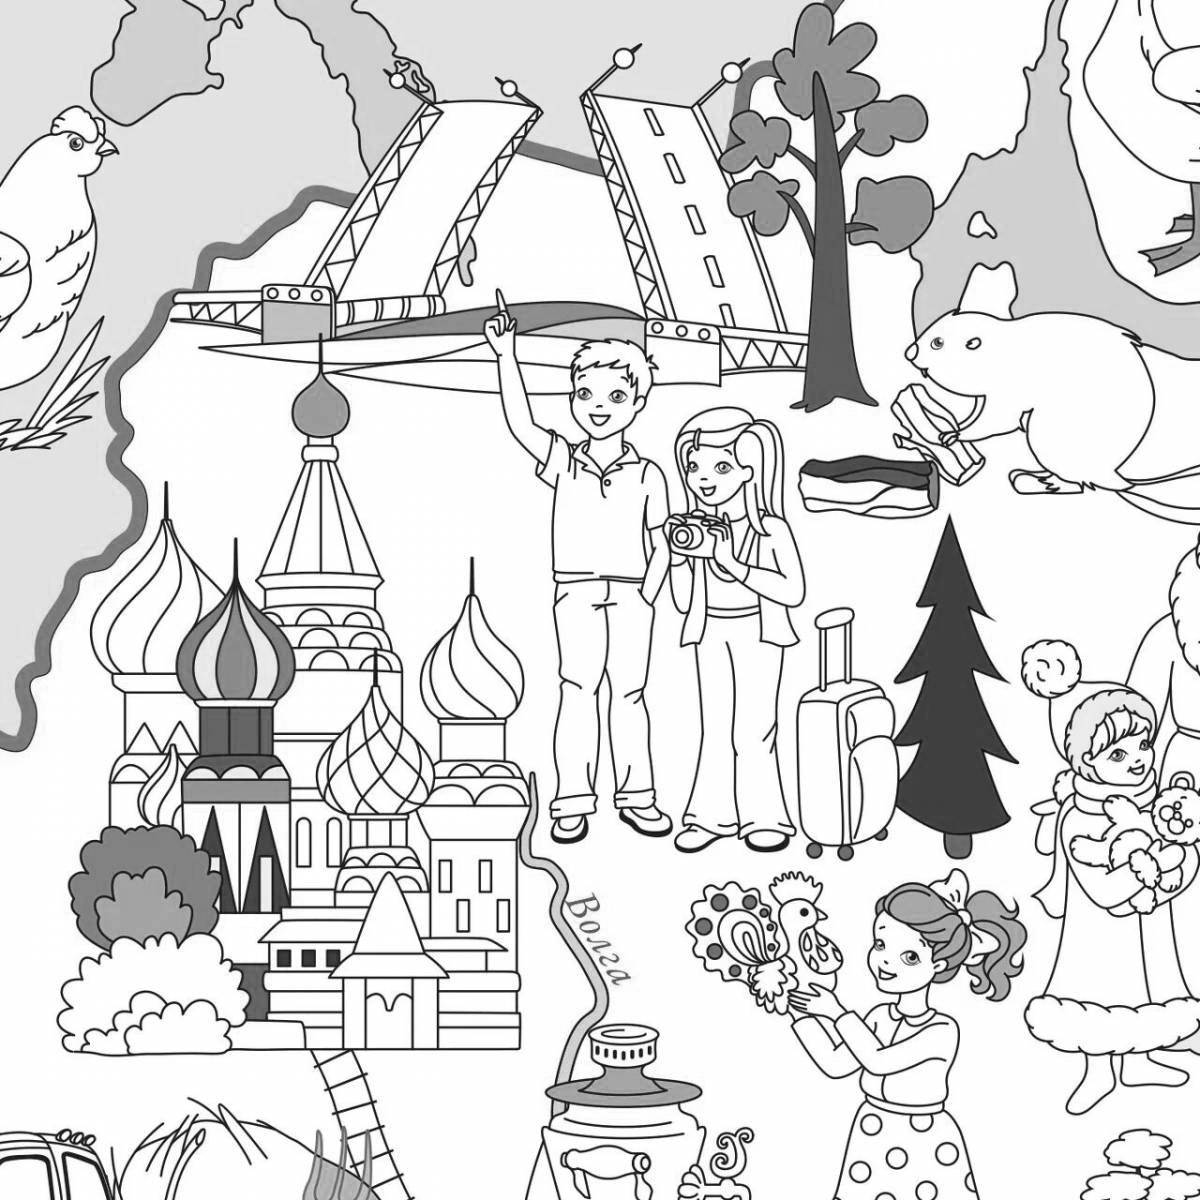 Attractive moscow map coloring page